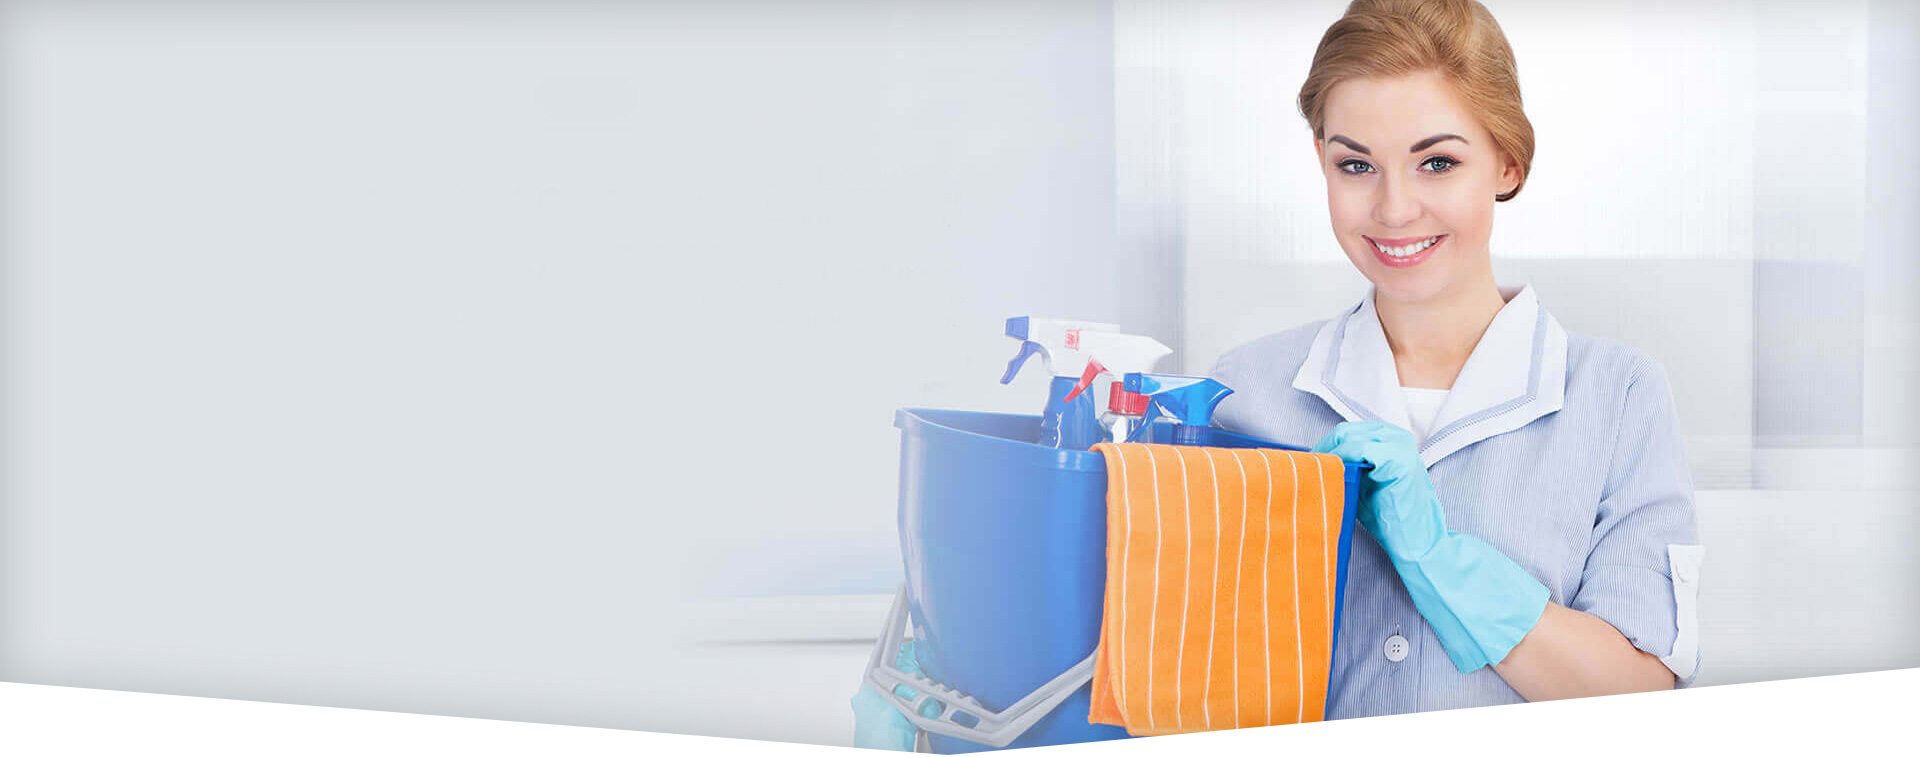 Professional House Cleaning Services Melbourne